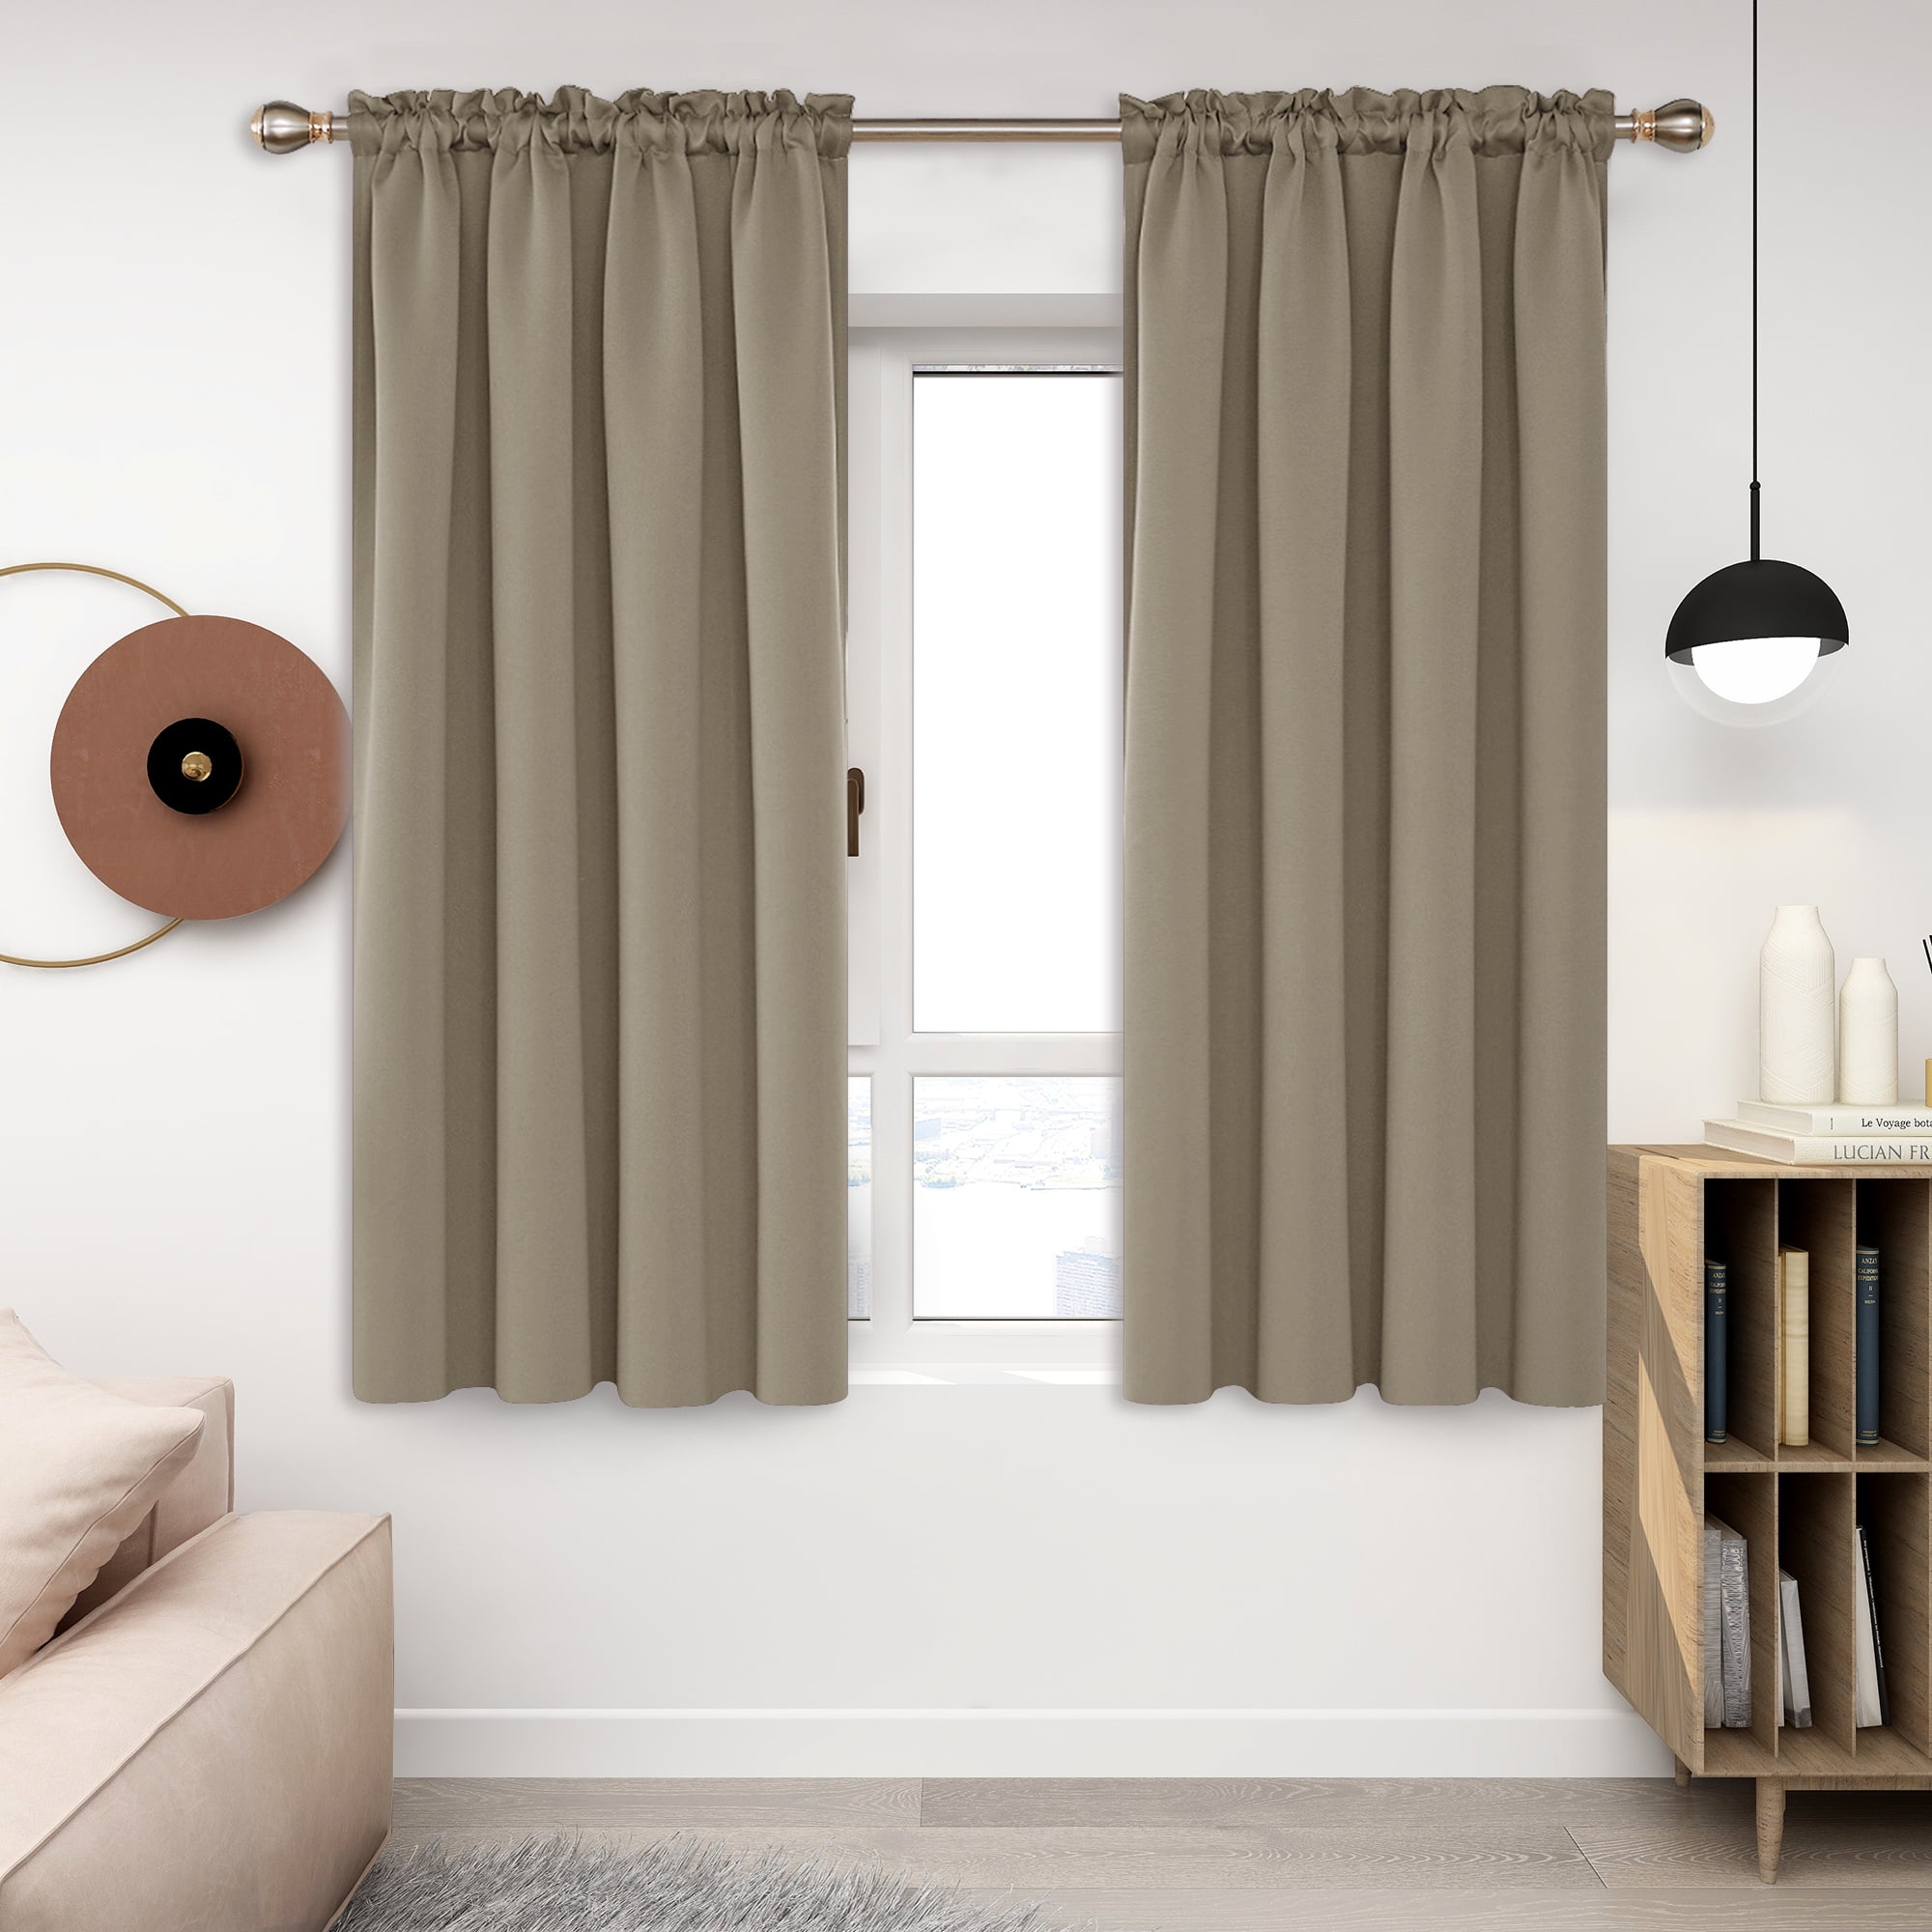 Deconovo Black Blackout Curtains Thermal Insulated Rod Pocket Room Darkening for 